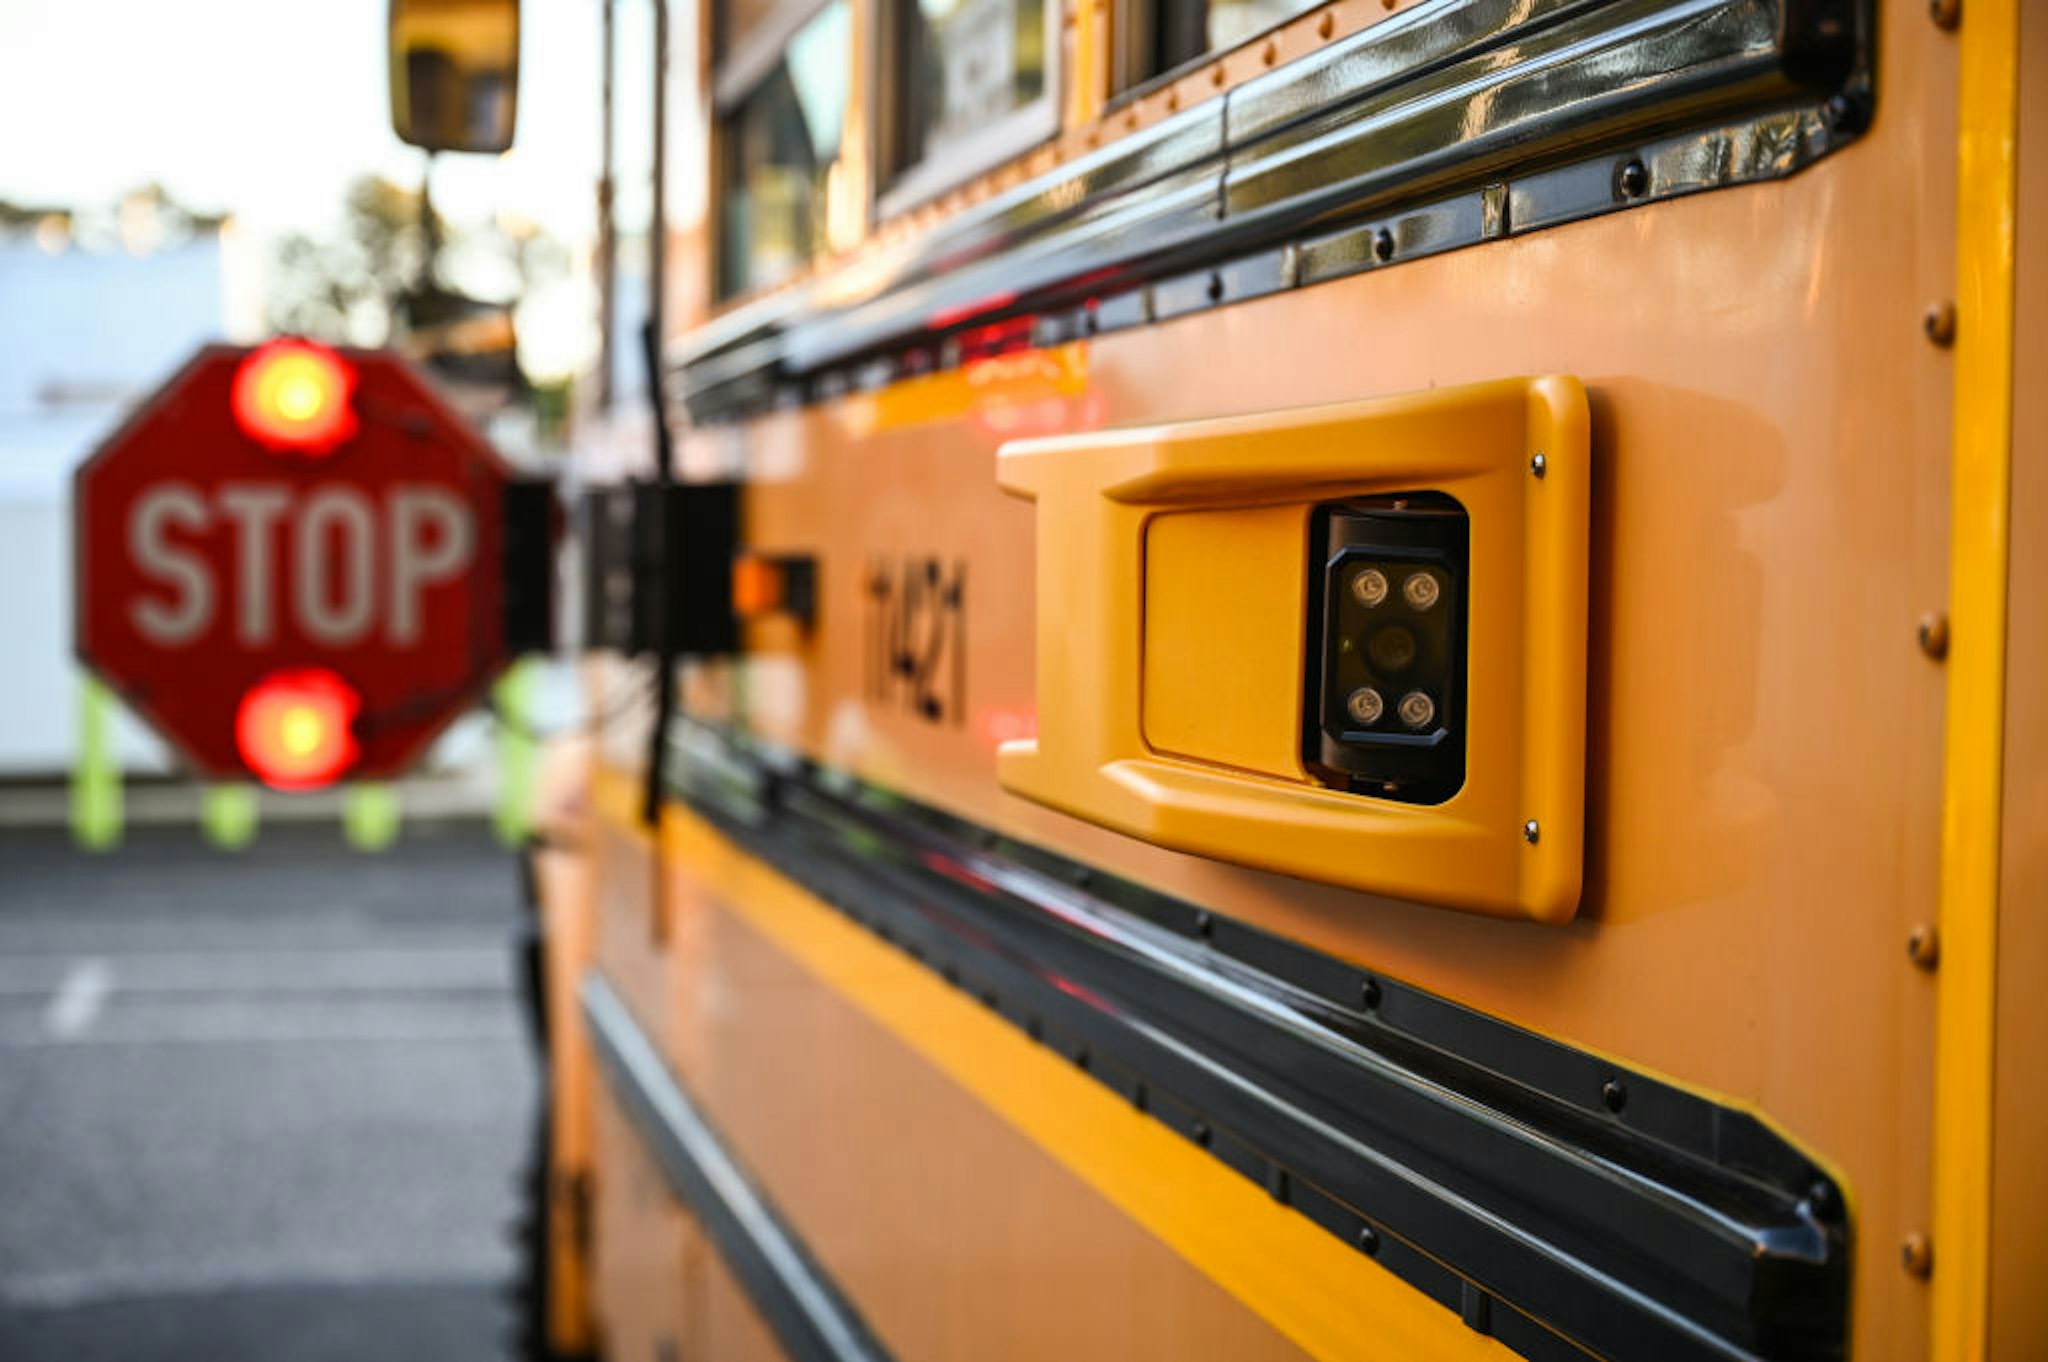 Medford, N.Y.: Close-up of a camera attached to a school bus in the company yard in Medford, New York on October 20, 2021. The cameras identify cars that pass the school bus stop arms. (Photo by Steve Pfost/Newsday RM via Getty Images)